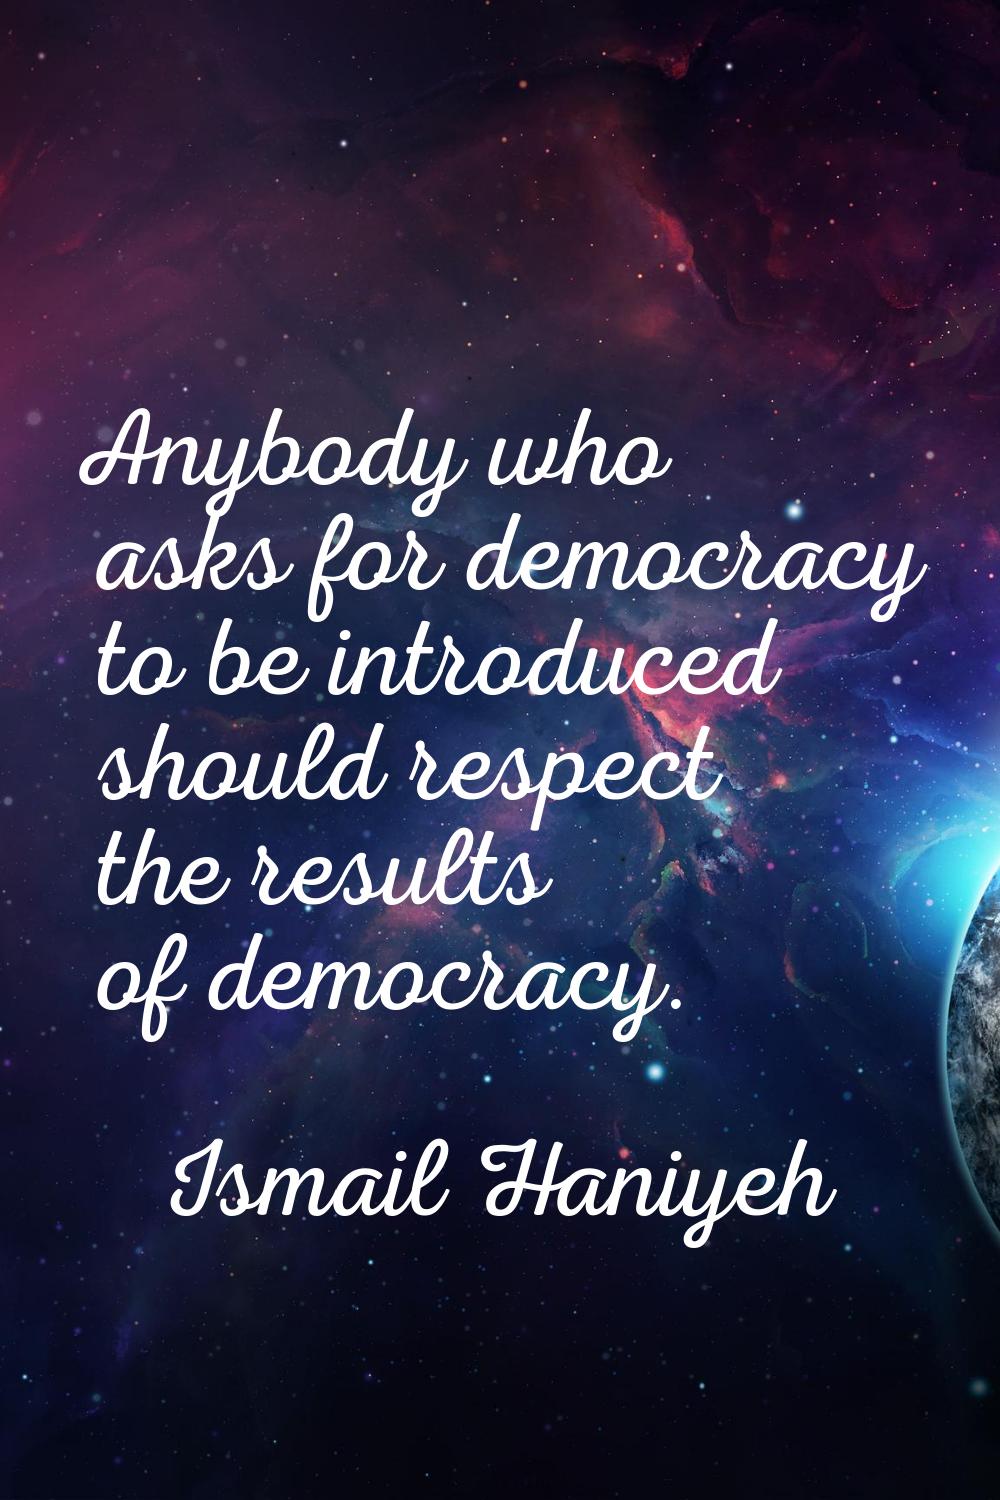 Anybody who asks for democracy to be introduced should respect the results of democracy.